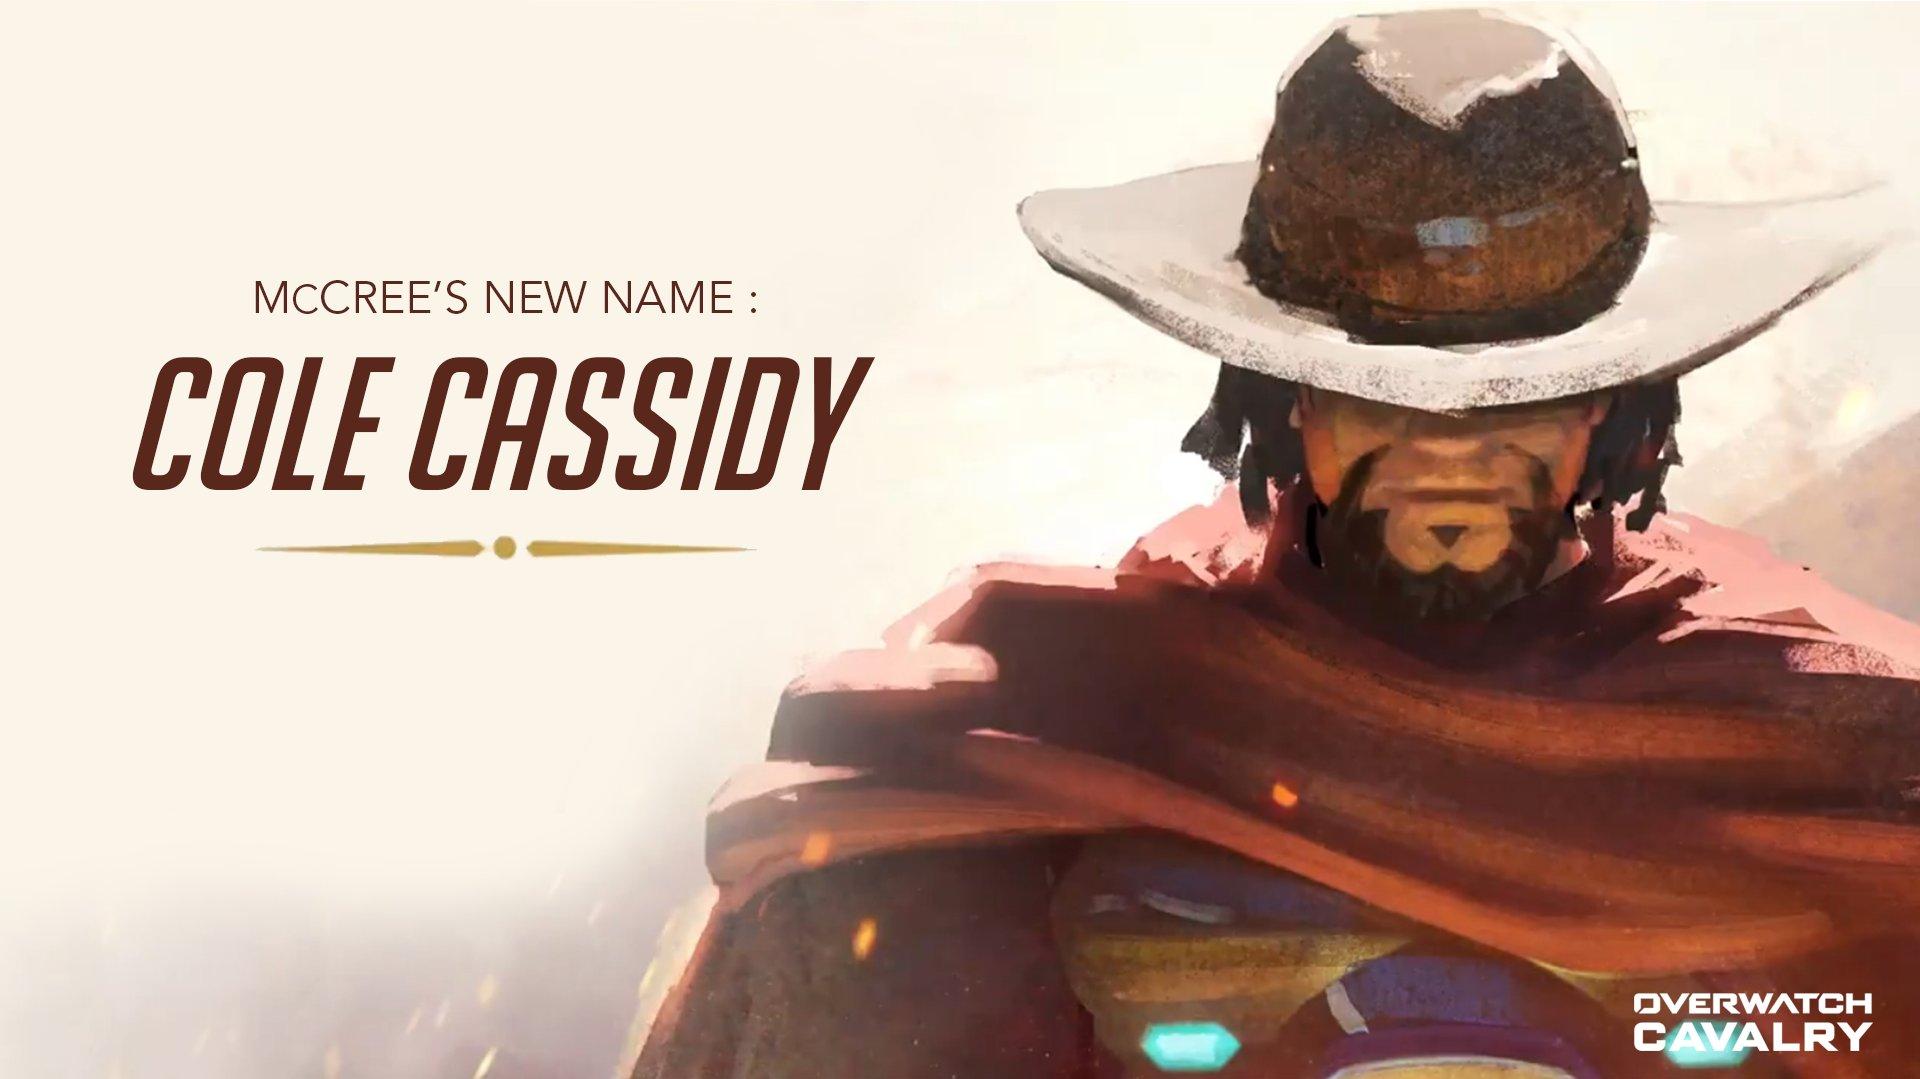 Overwatch Cavalry No Mccree Renamed To Cole Cassidy